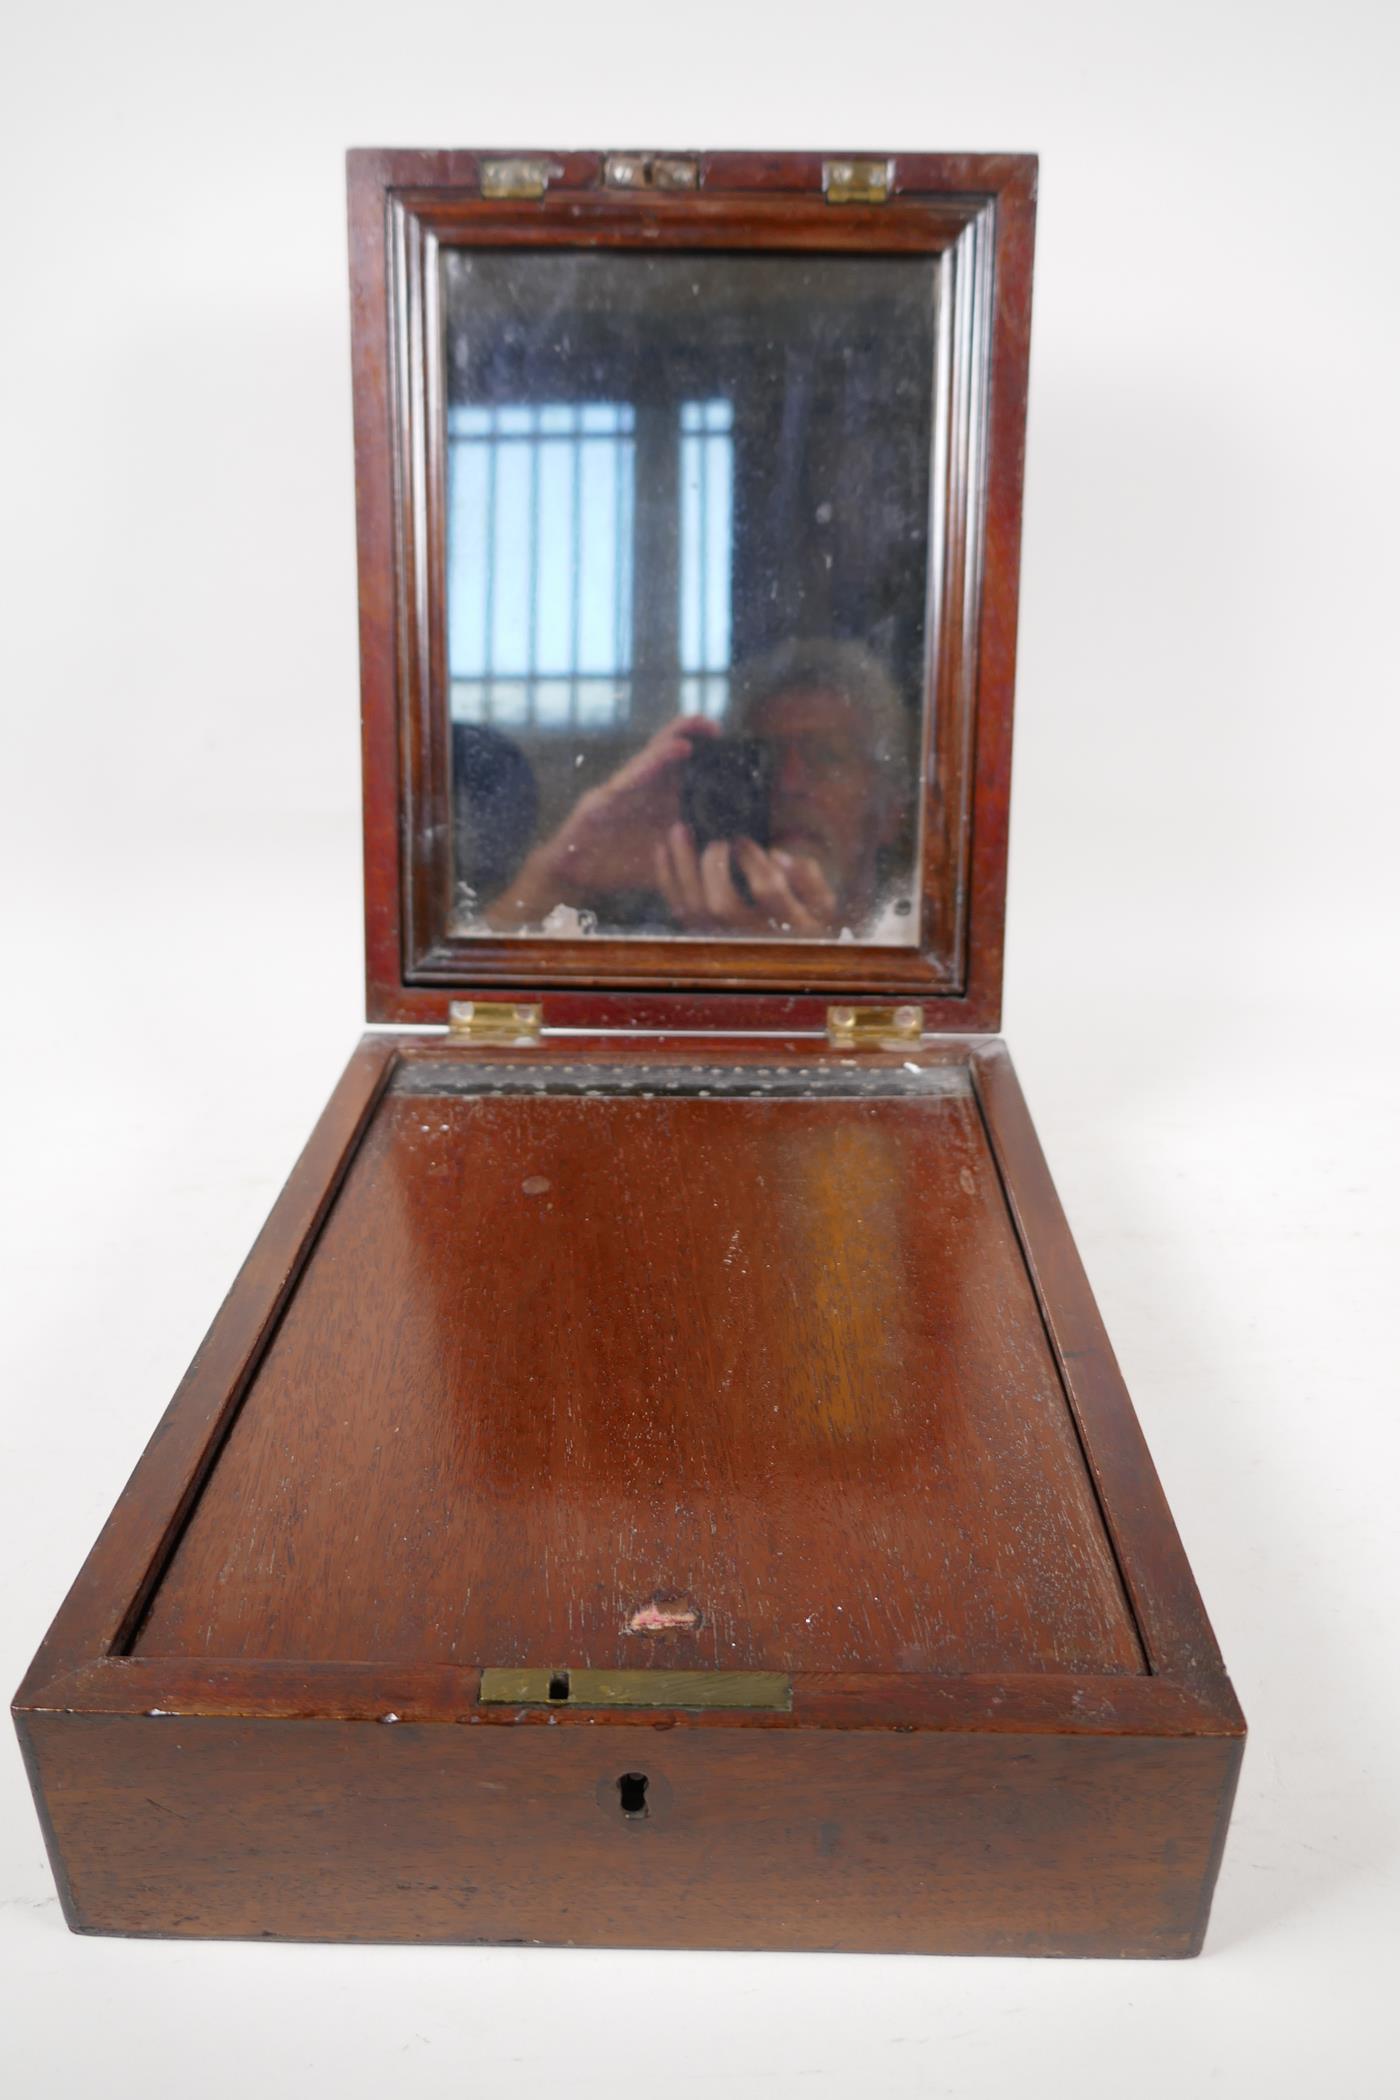 A C19th mahogany vanity box with mirror and fitted trays, 8" x 11" x 3" - Image 3 of 4